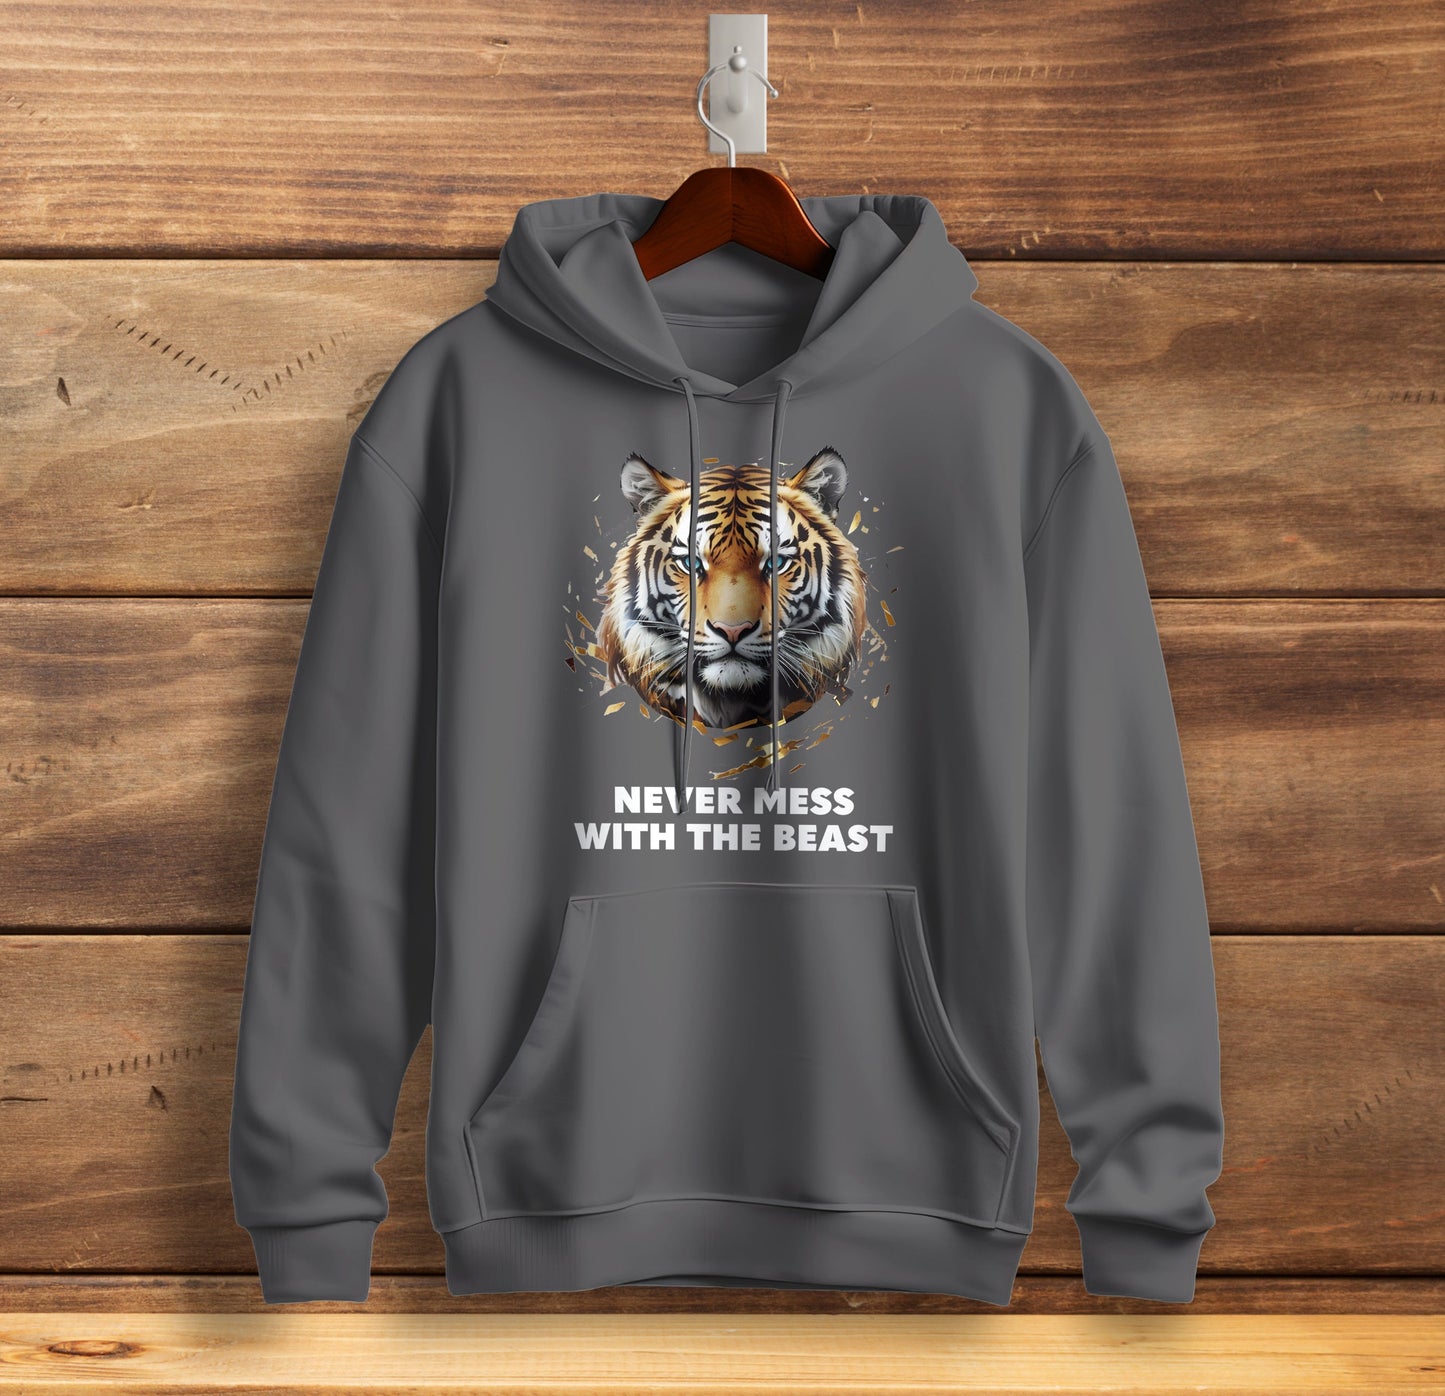 Never Mess with the Beast - Tiger Graphic Printed Hooded Sweat Shirt for Men - Cotton - Magnificence of India Sweat Shirt